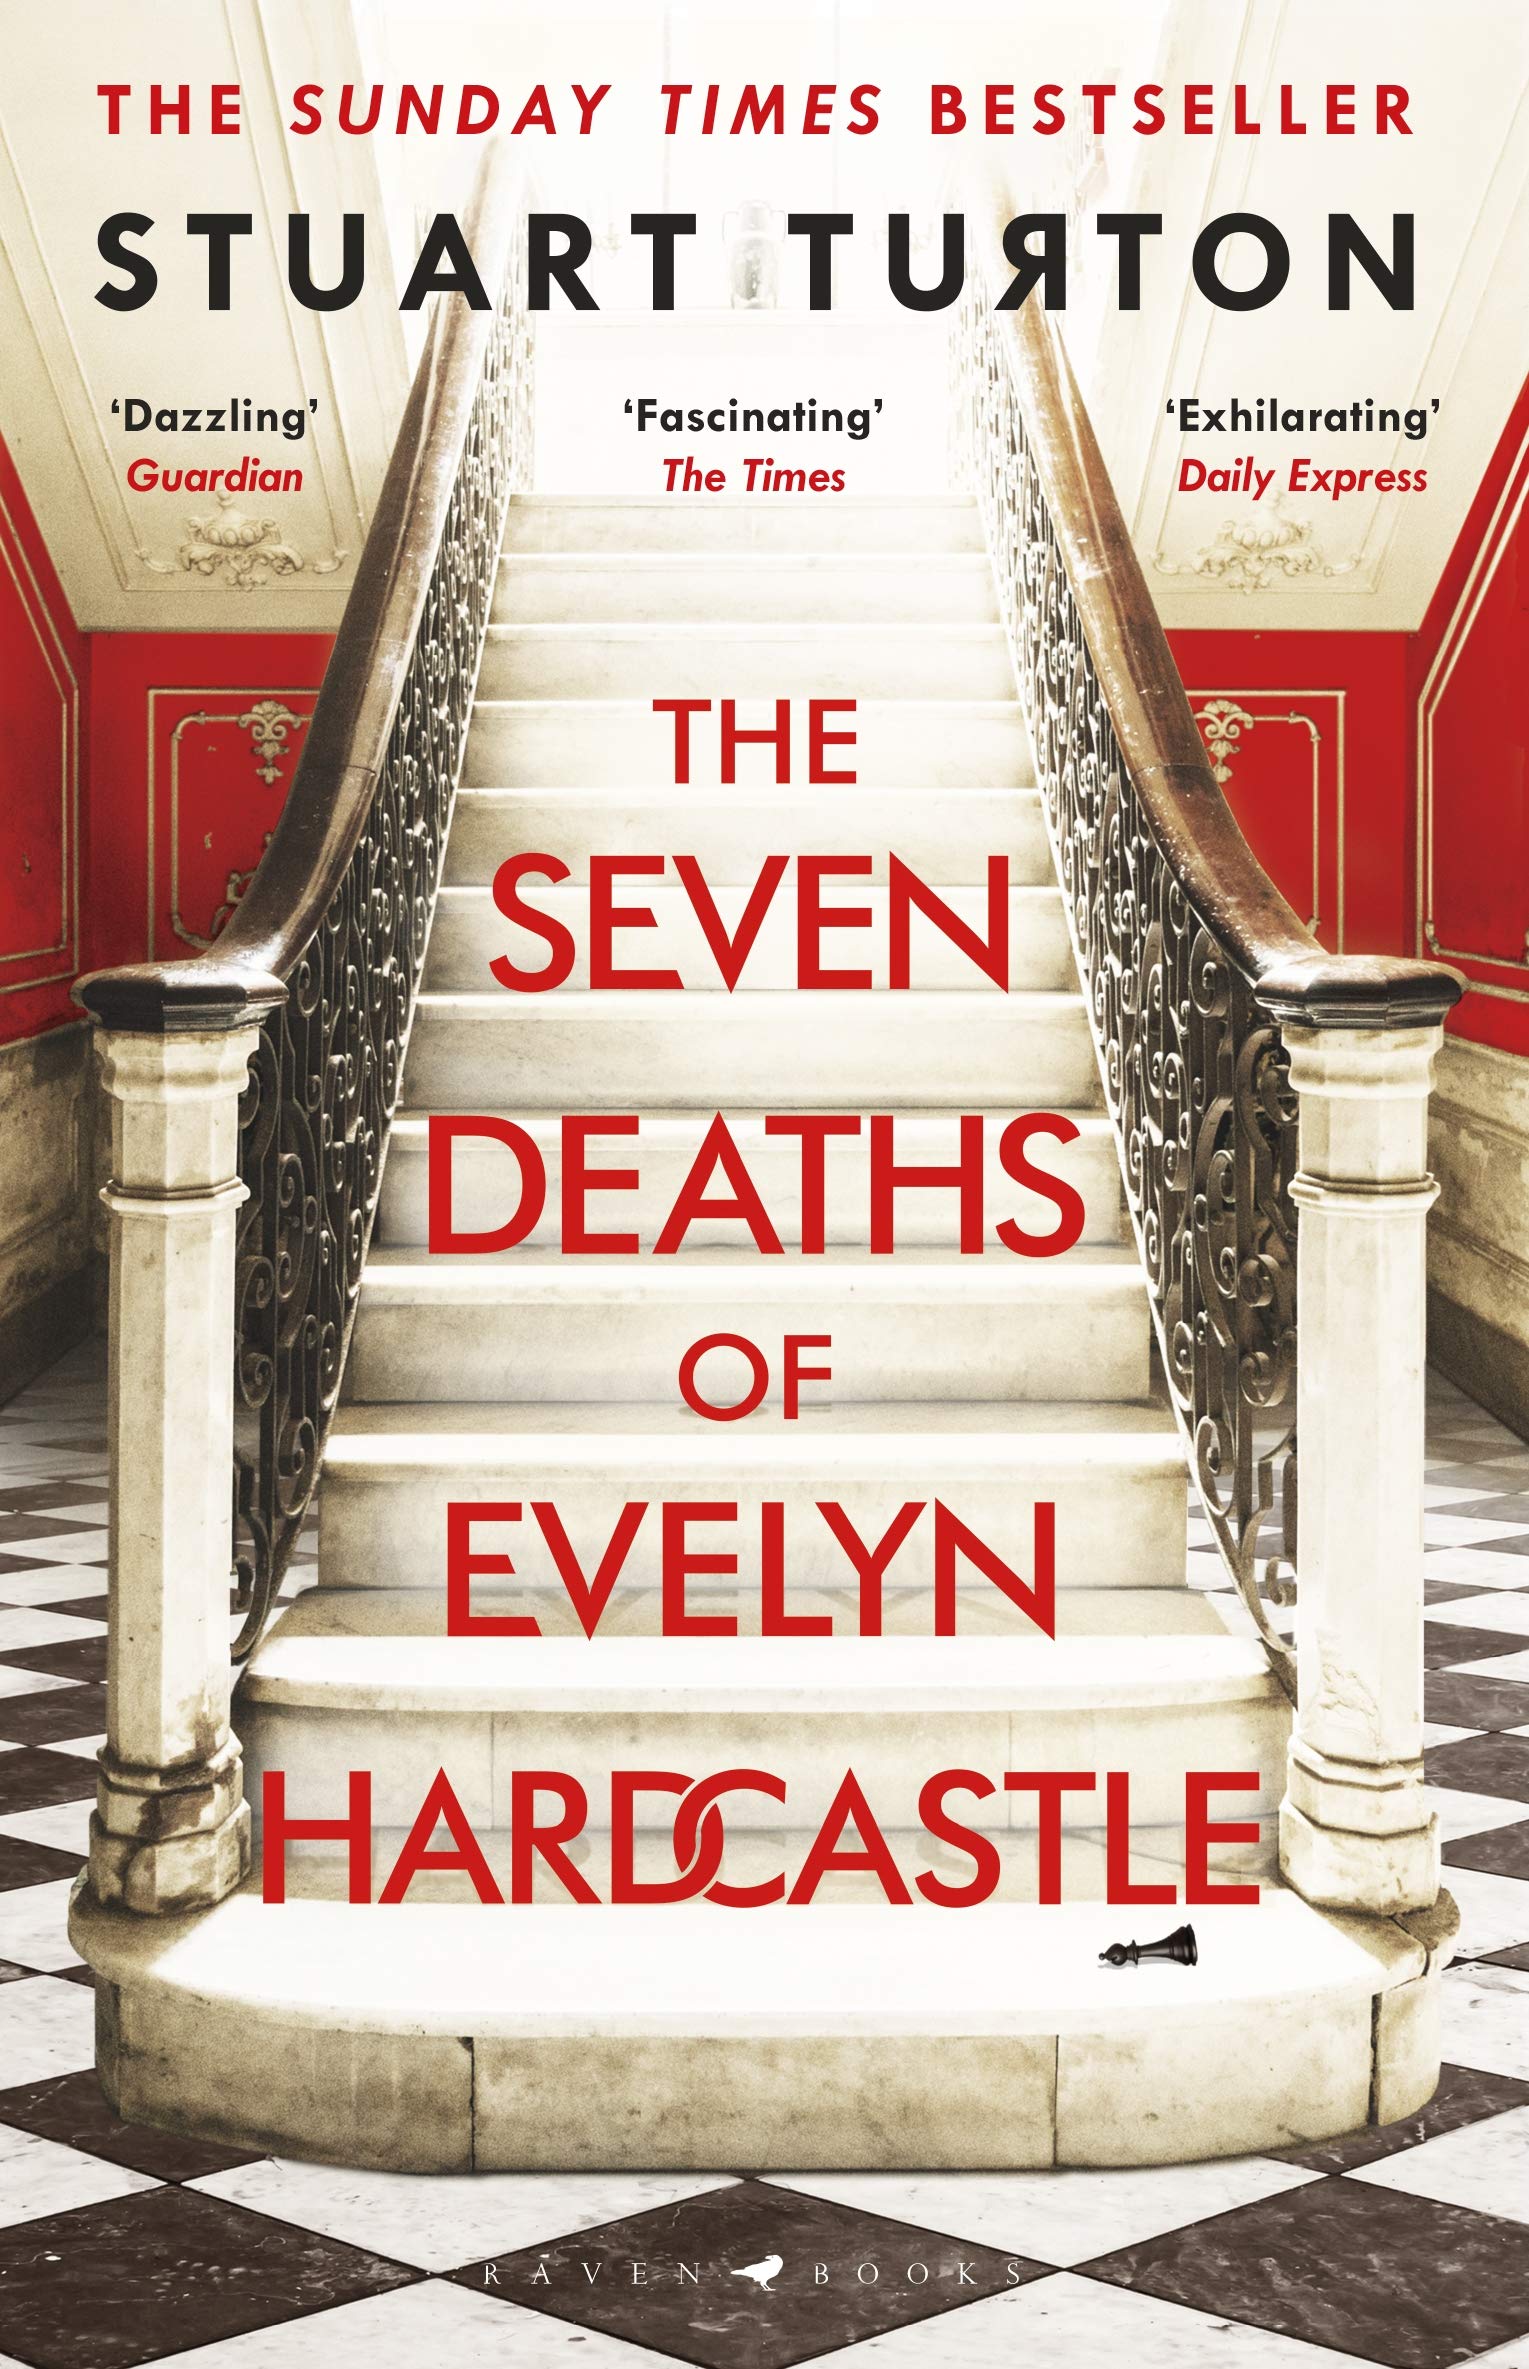 Seven deaths of evelyn